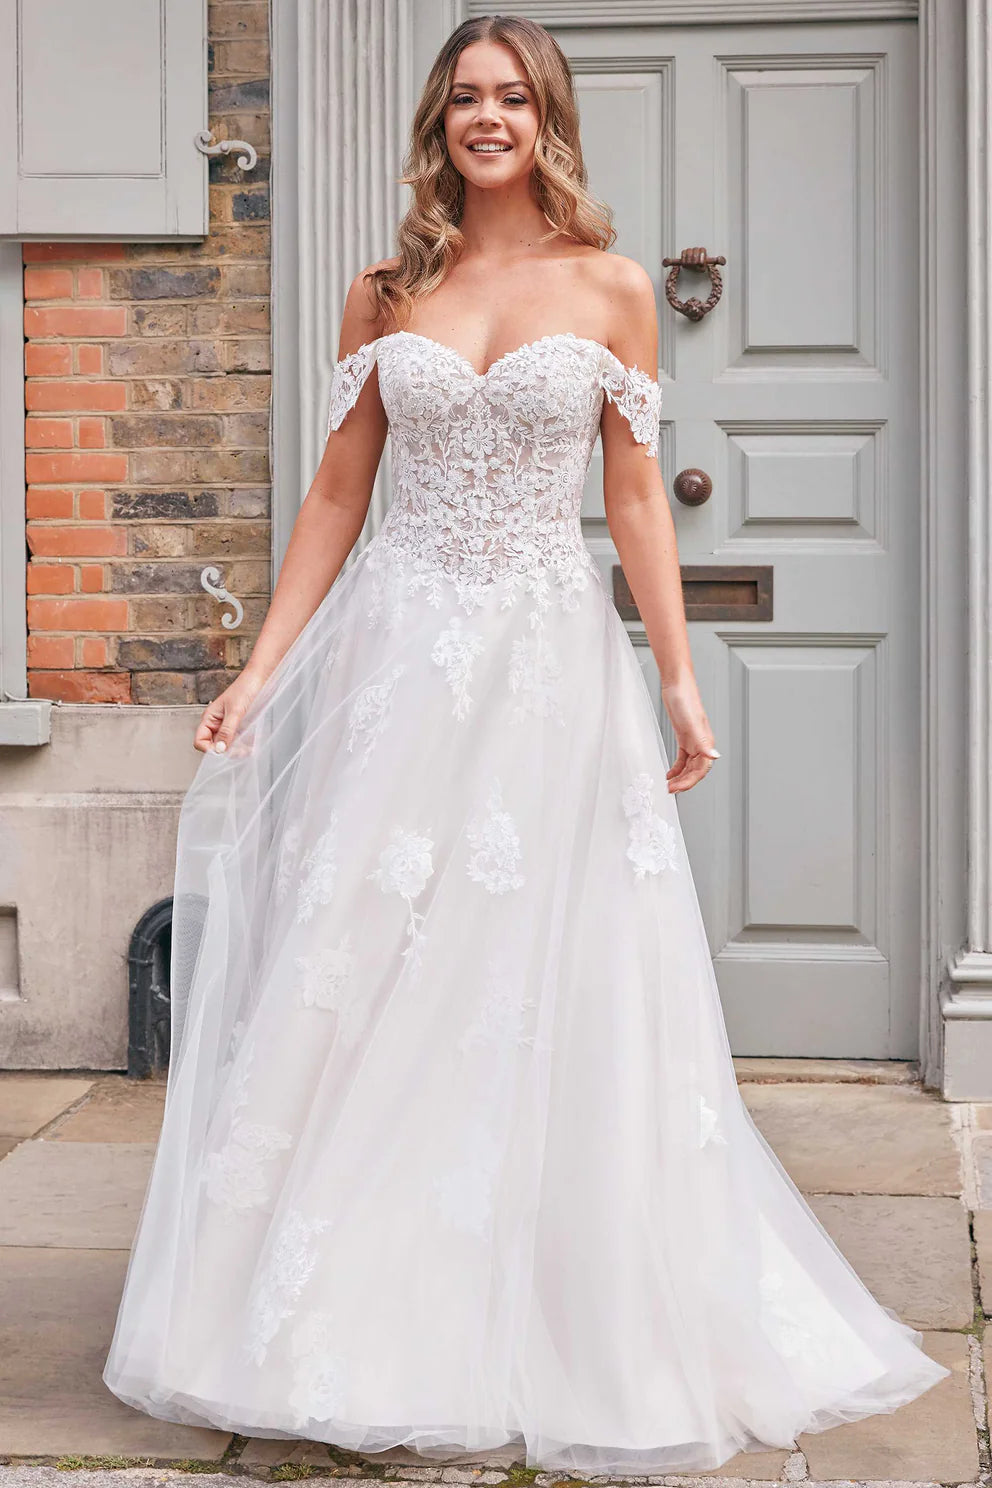 UK18 Meredith - Adore Bridal and Occasion Wear